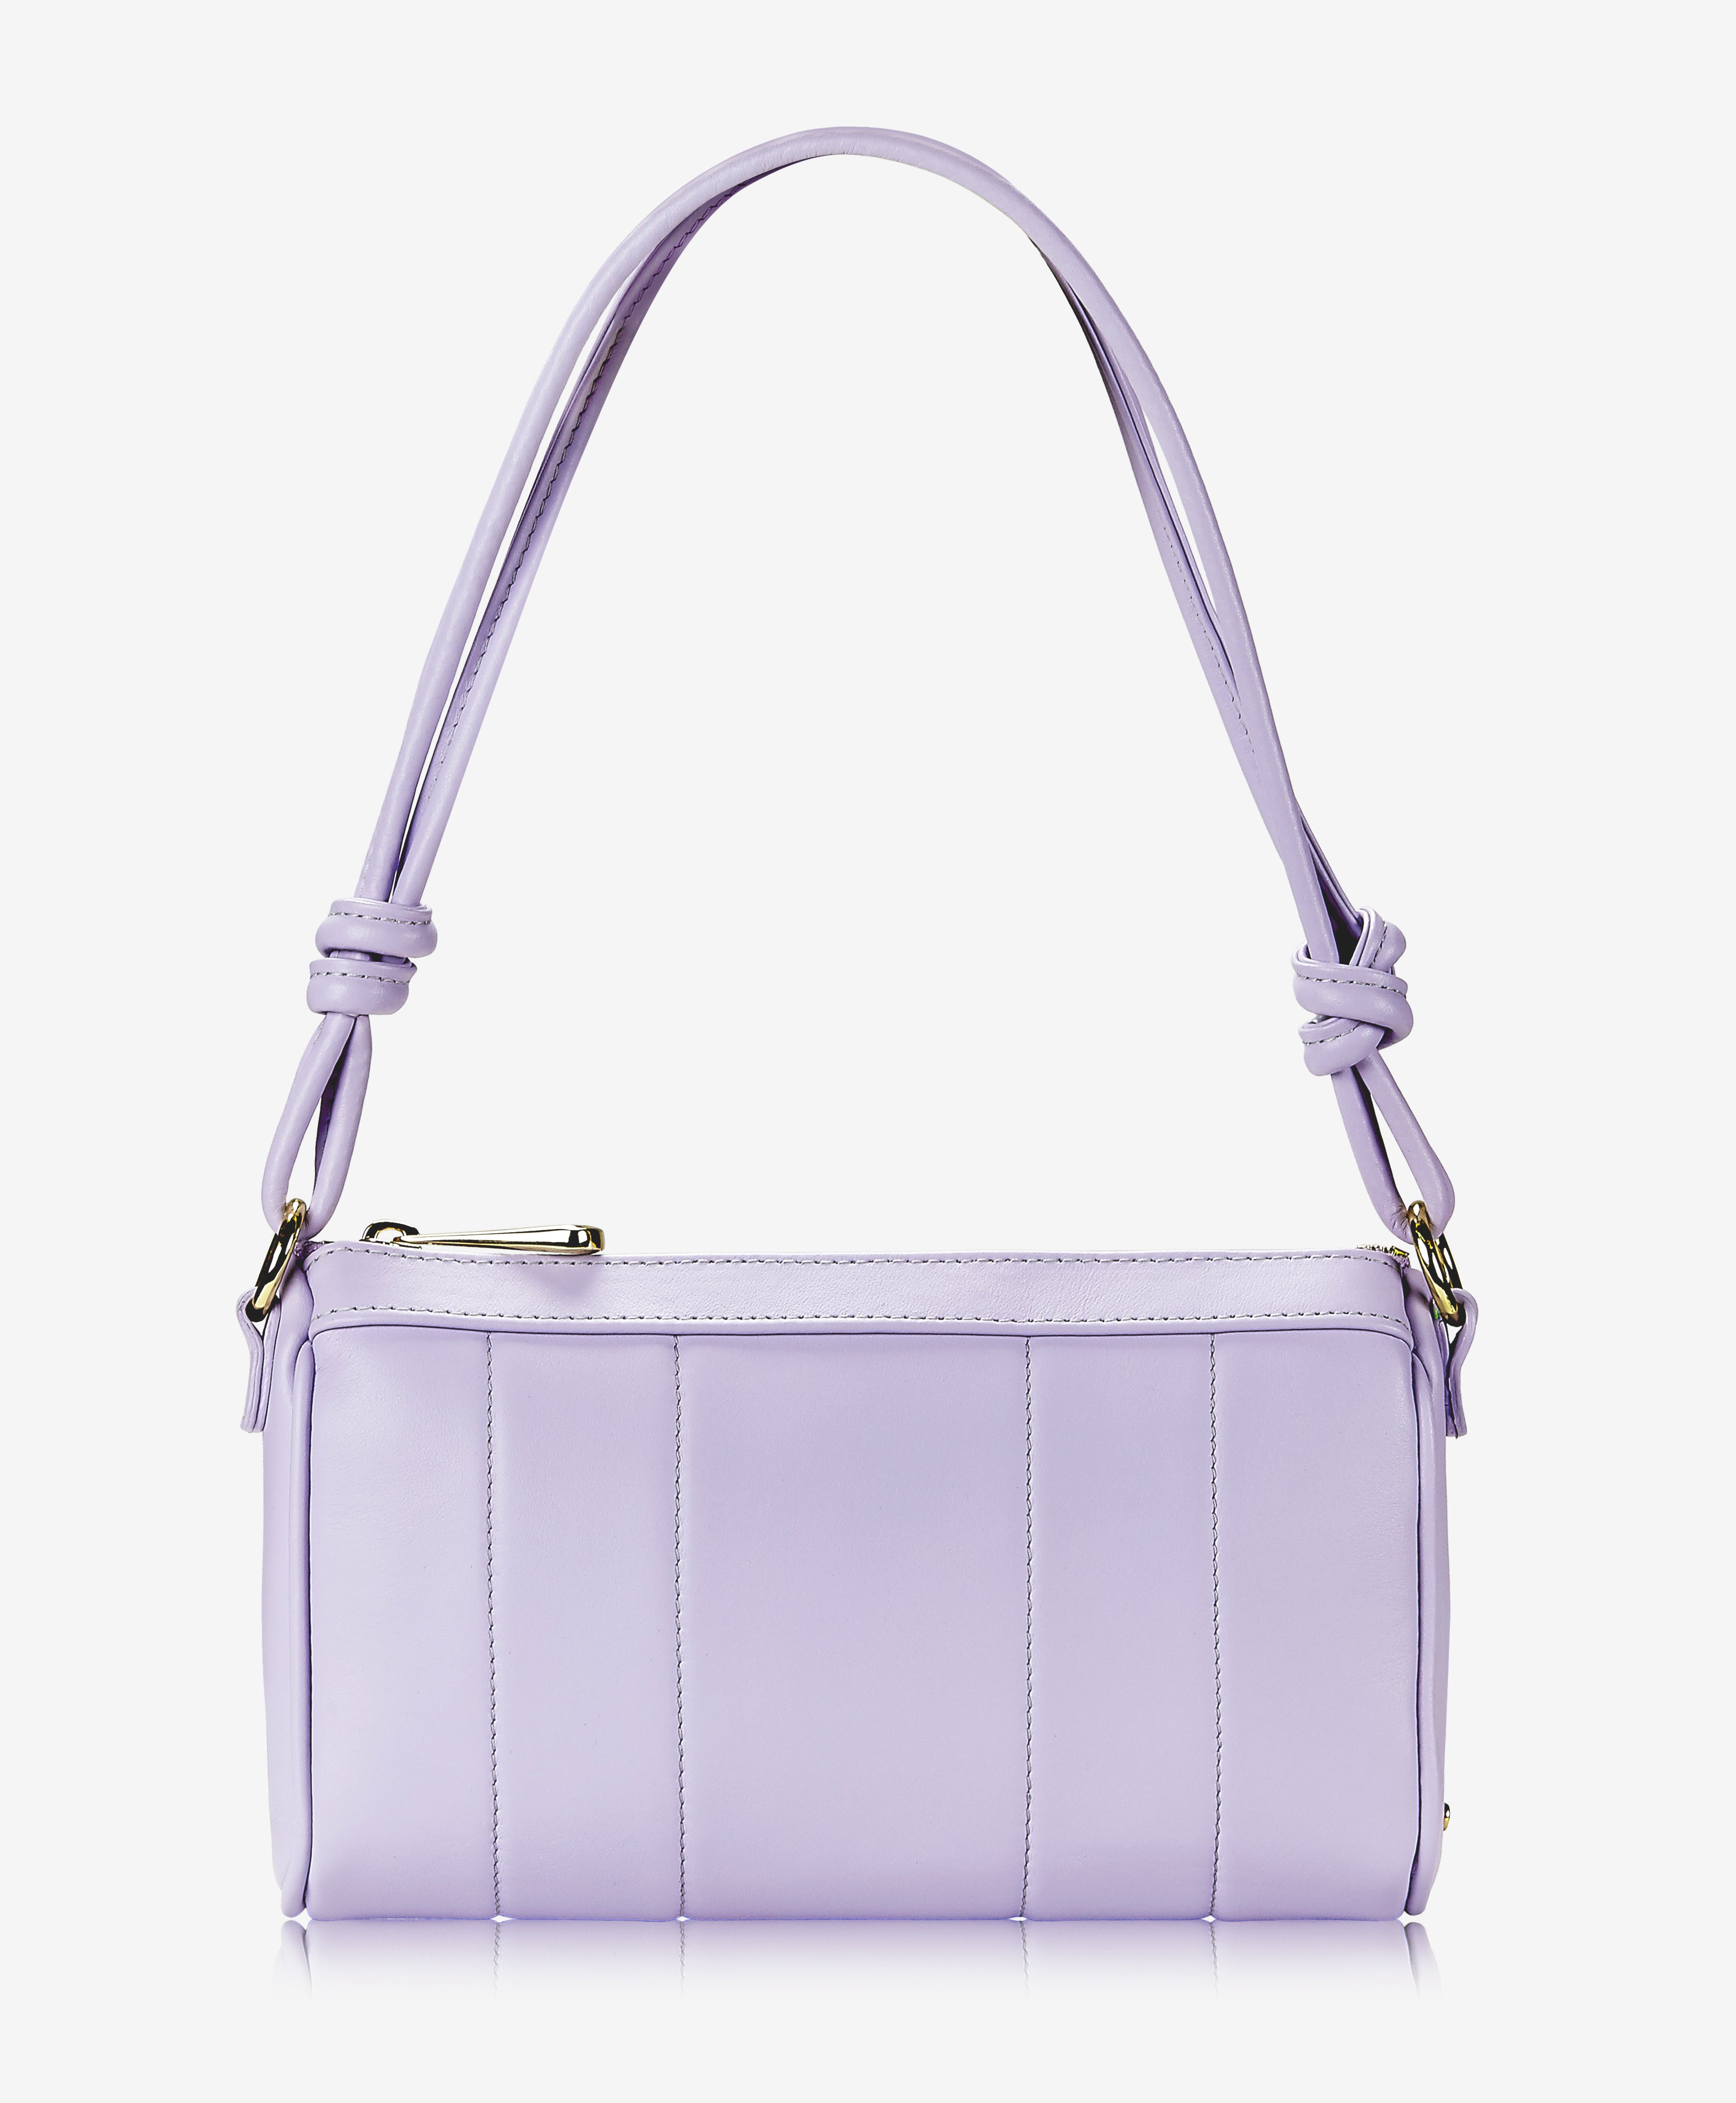 Jane & Berry Women's Large Woven Faux Leather Shoulder Bag with Pouch Lilac  - Walmart.com